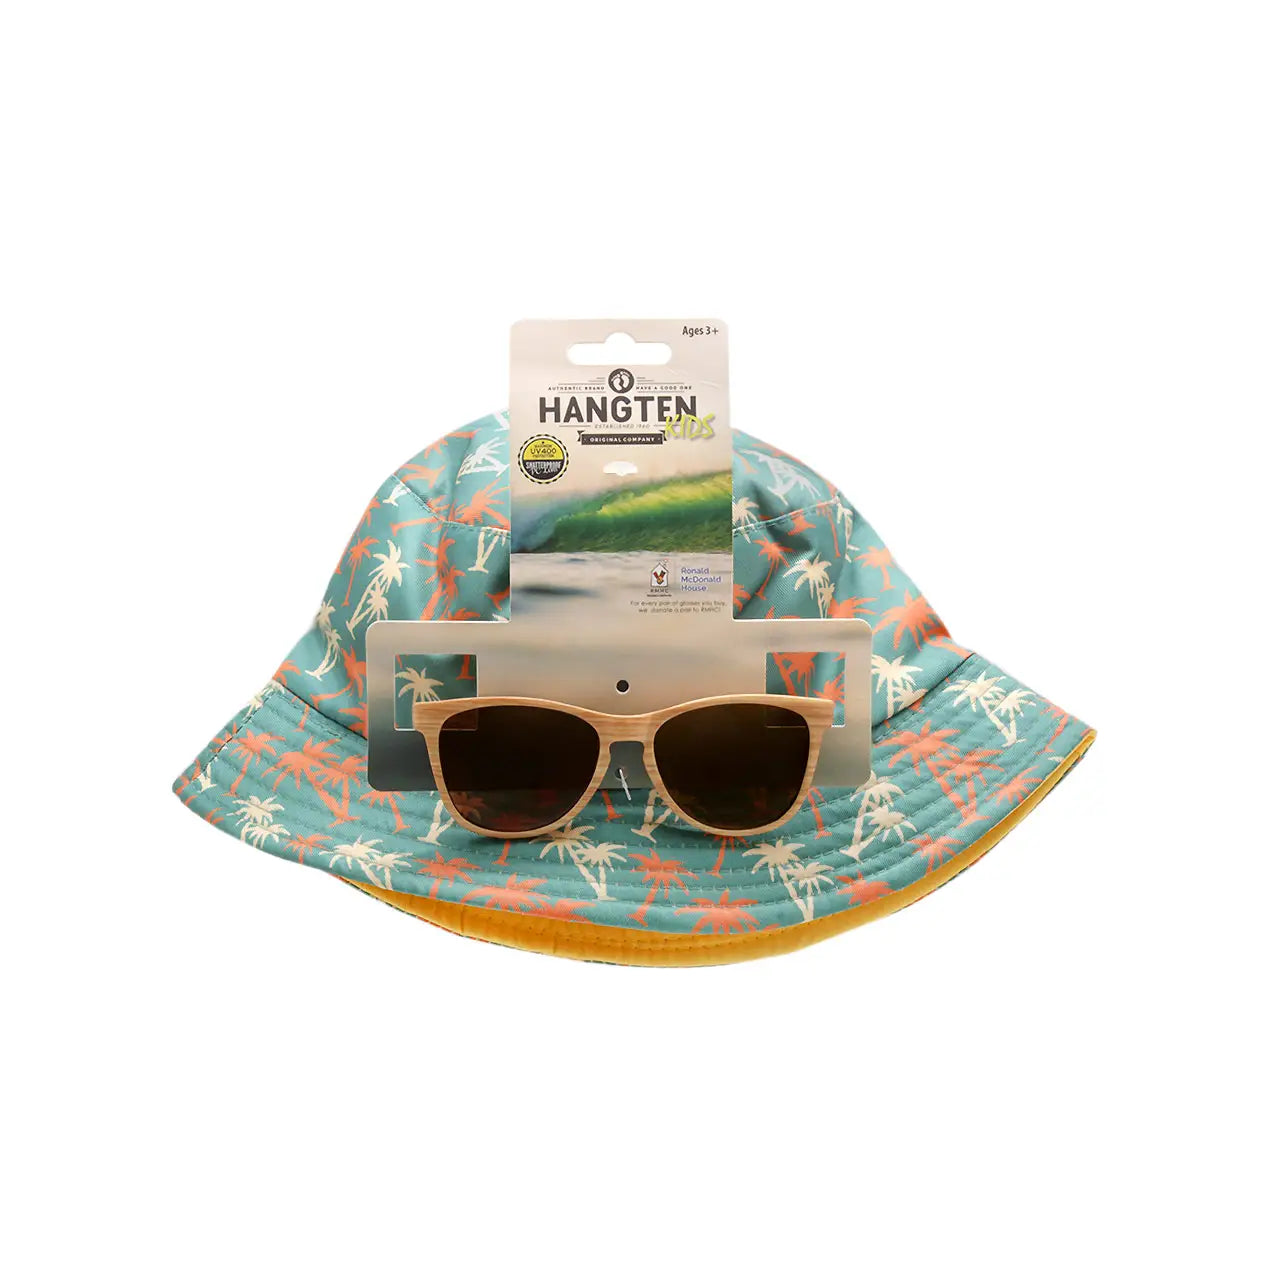 Sunglasses and Hat Set- multiple styles to choose from